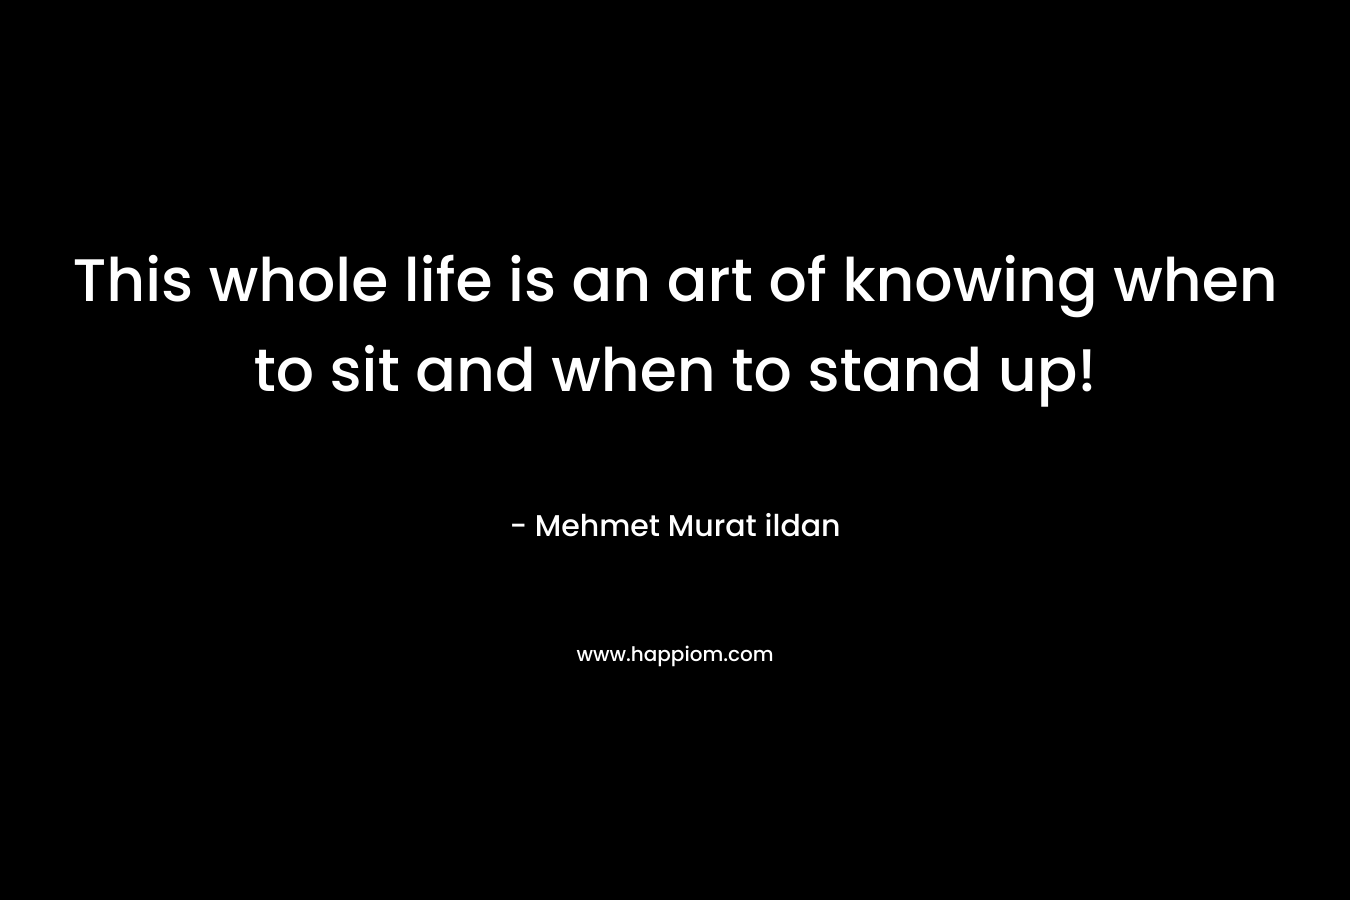 This whole life is an art of knowing when to sit and when to stand up!